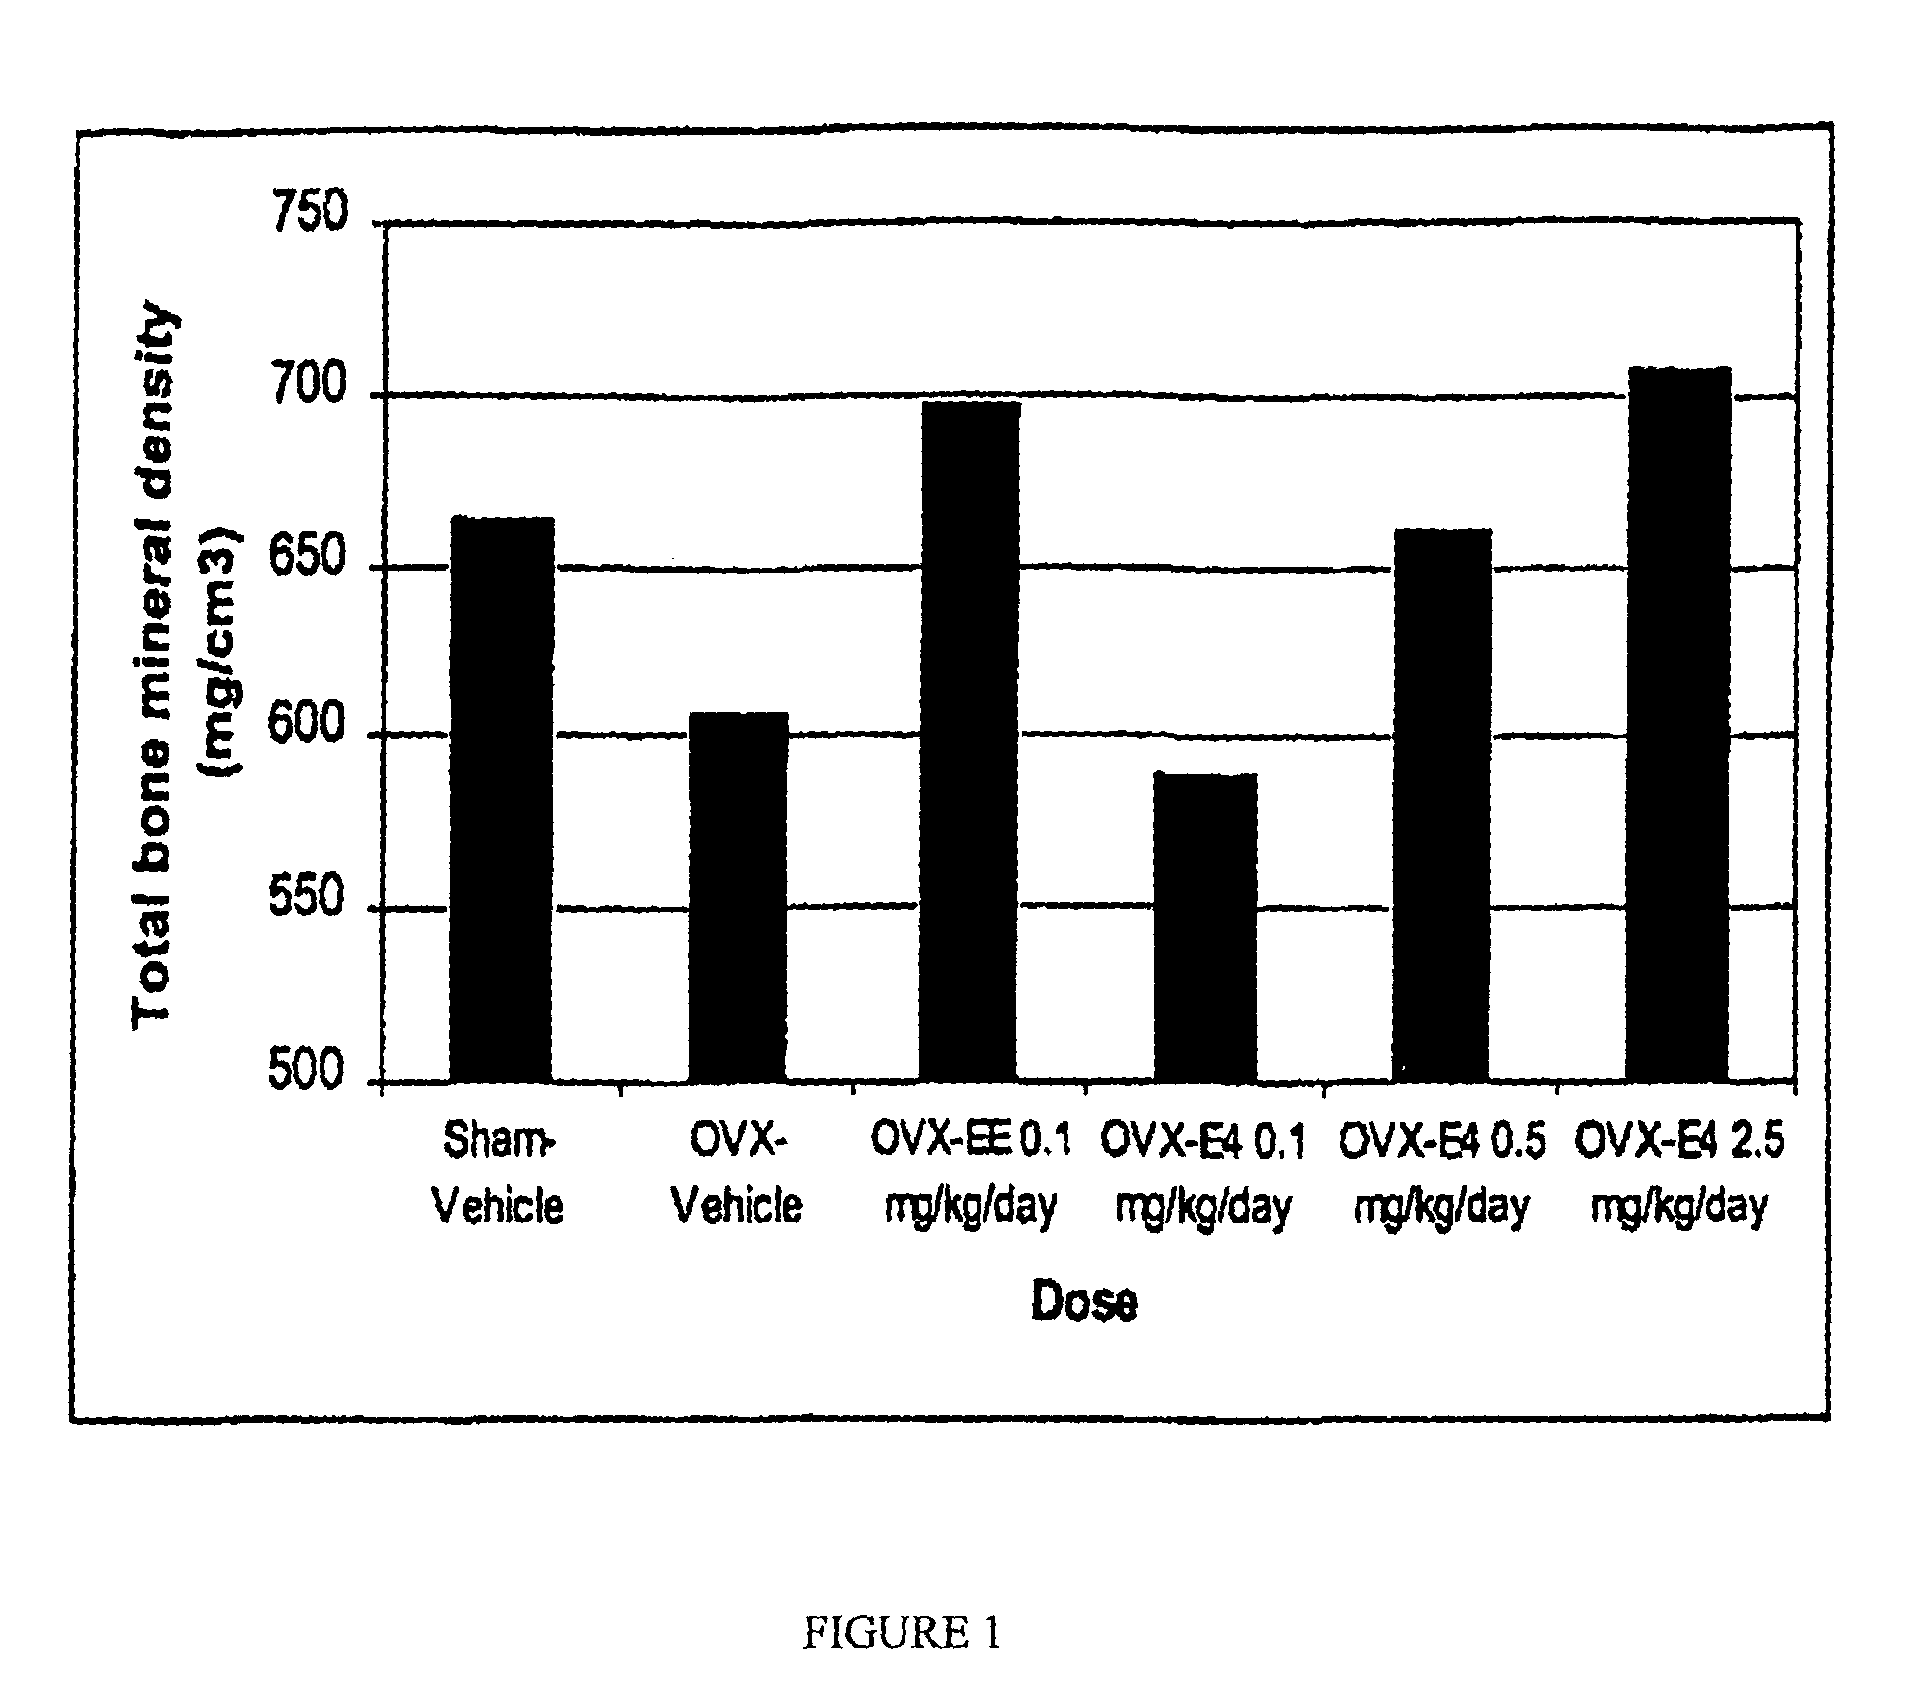 Estrogenic compounds in combination with progestogenic compounds in hormone-replacement therapy